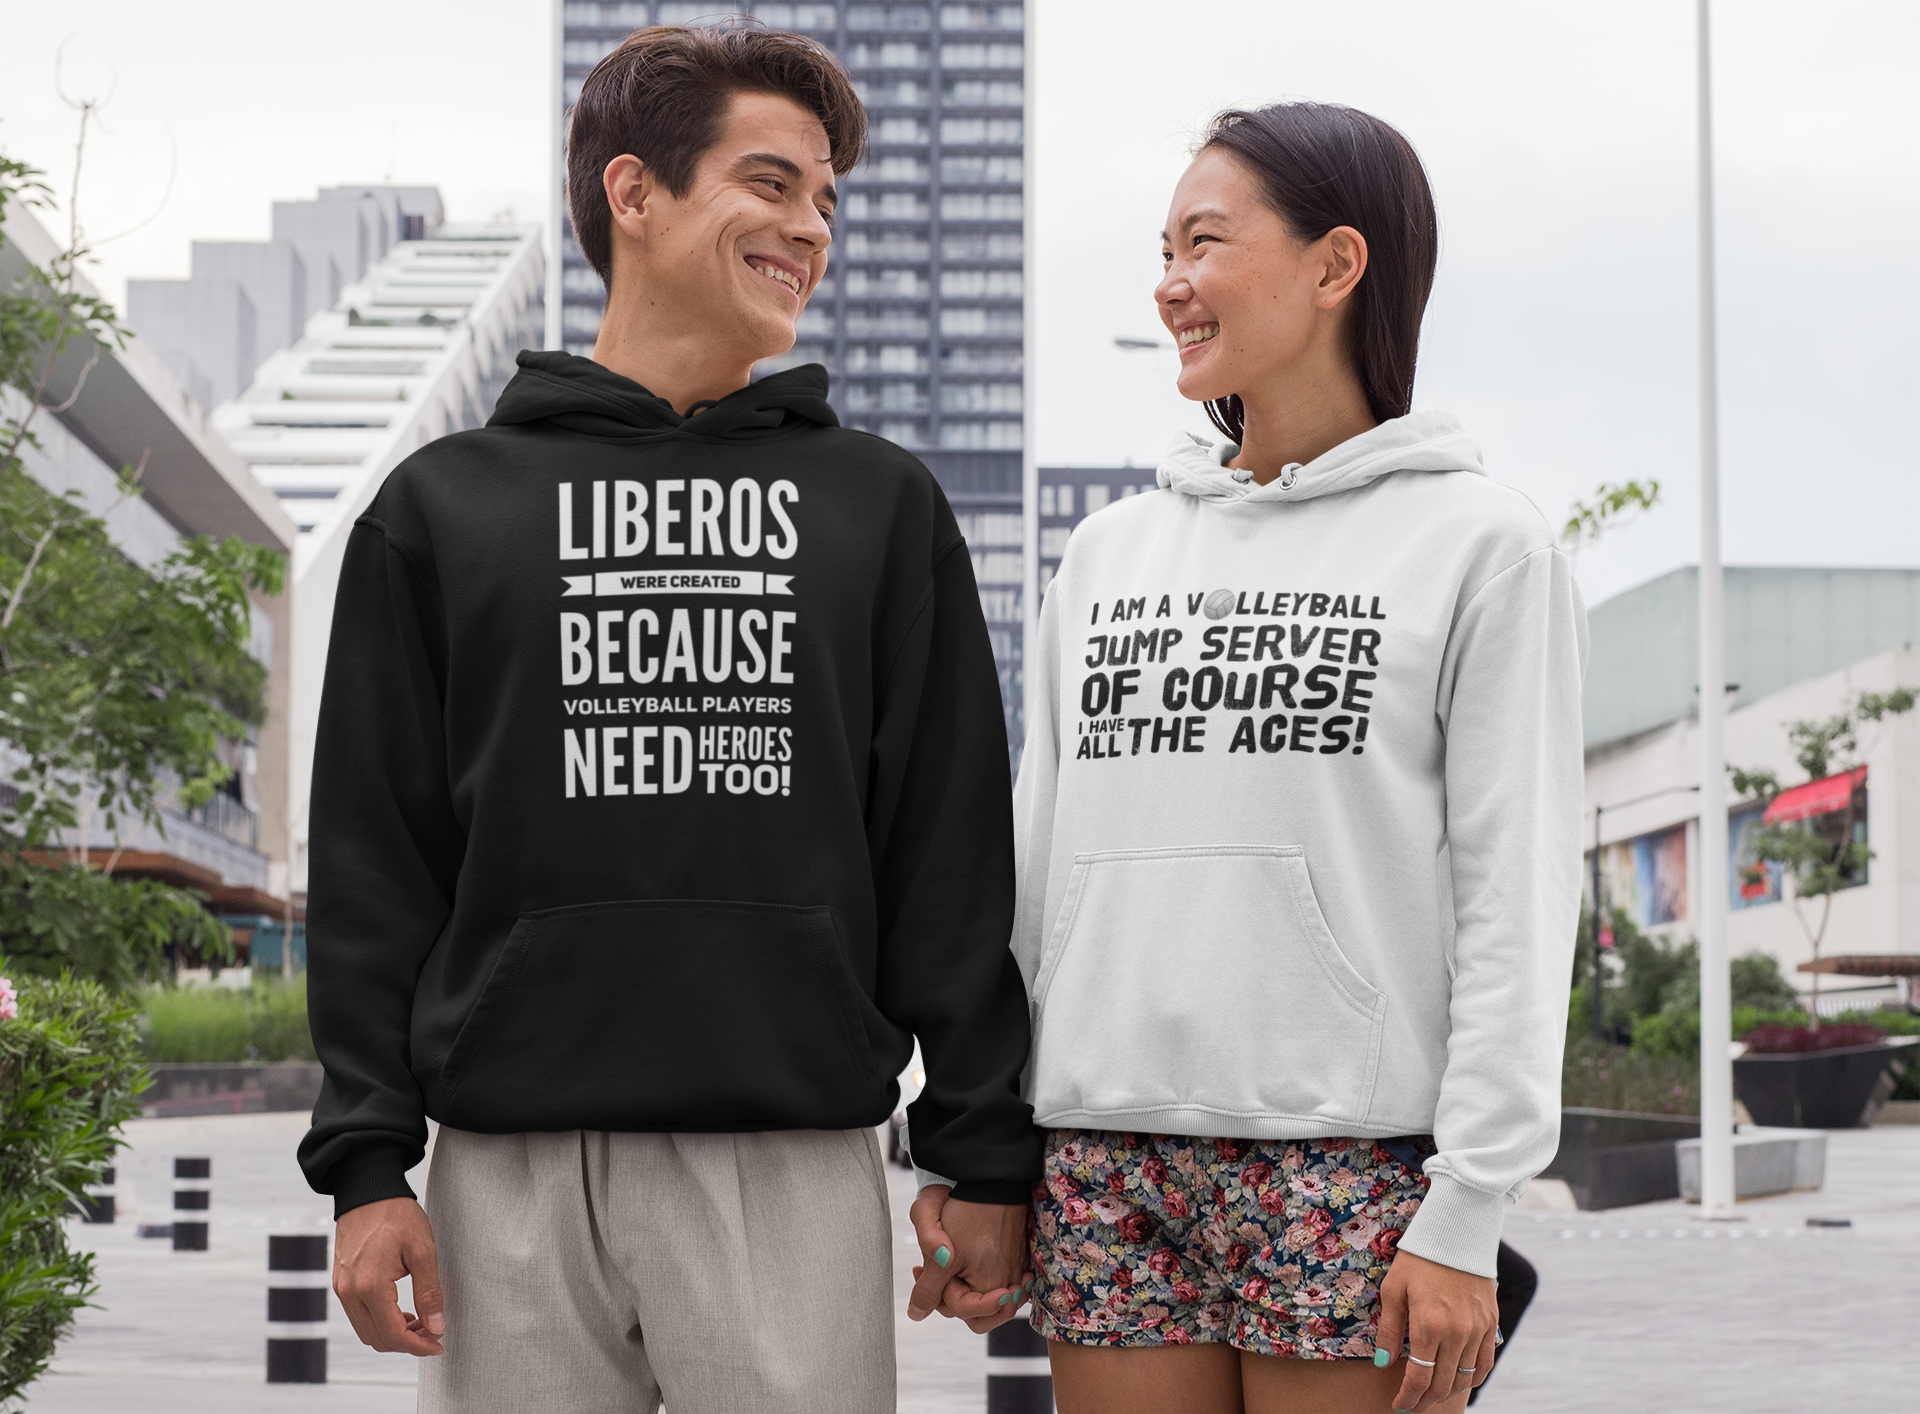 "Liberos were created because volleyball players need heroes too" volleyball shirt by Volleybragswag available on my ETSY shop. Click to place an order.